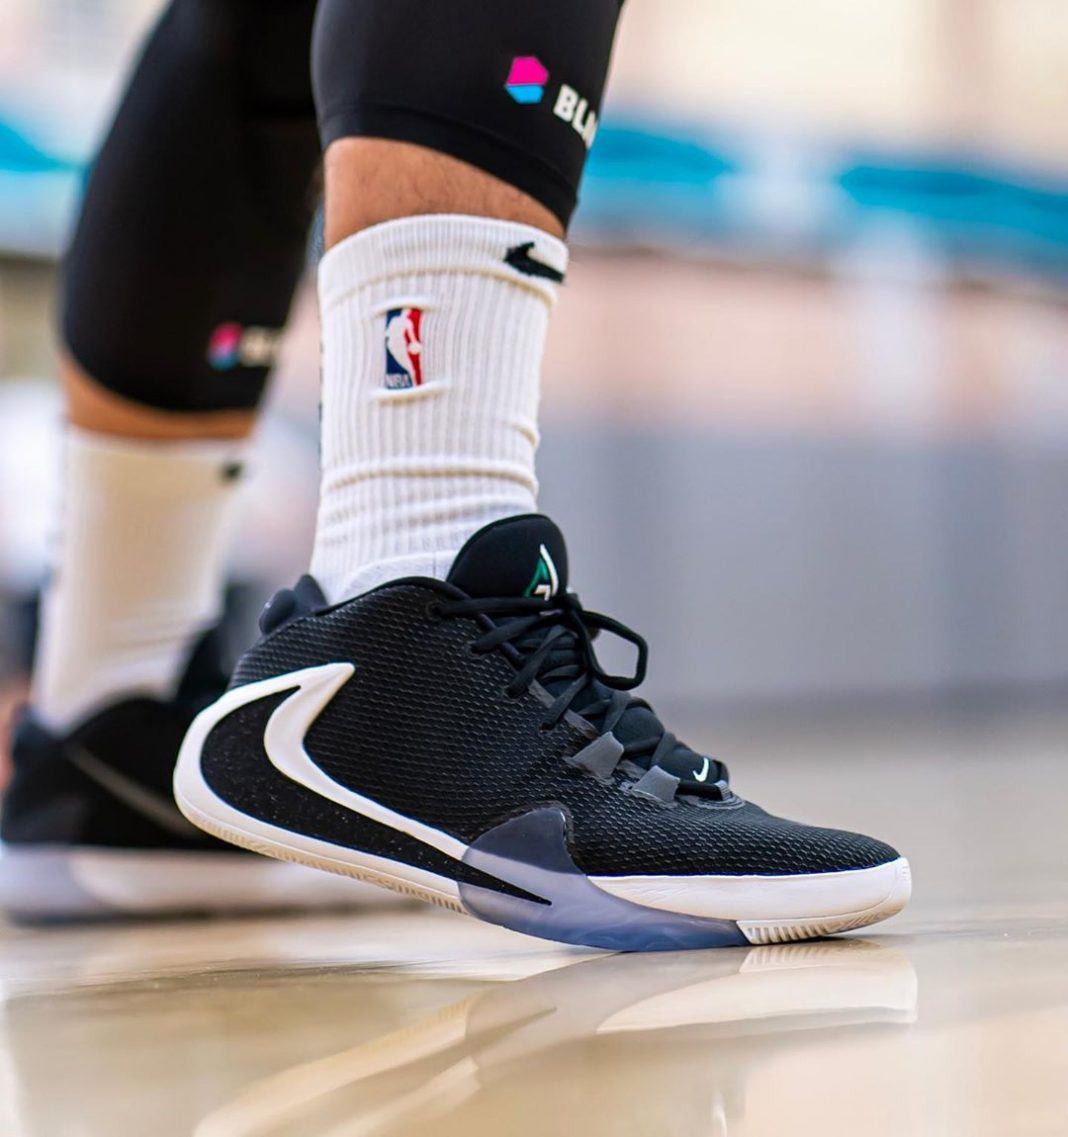 Here’s a detailed on-foot look at the @Nike Zoom Freak 1  Thoughts on this new s...